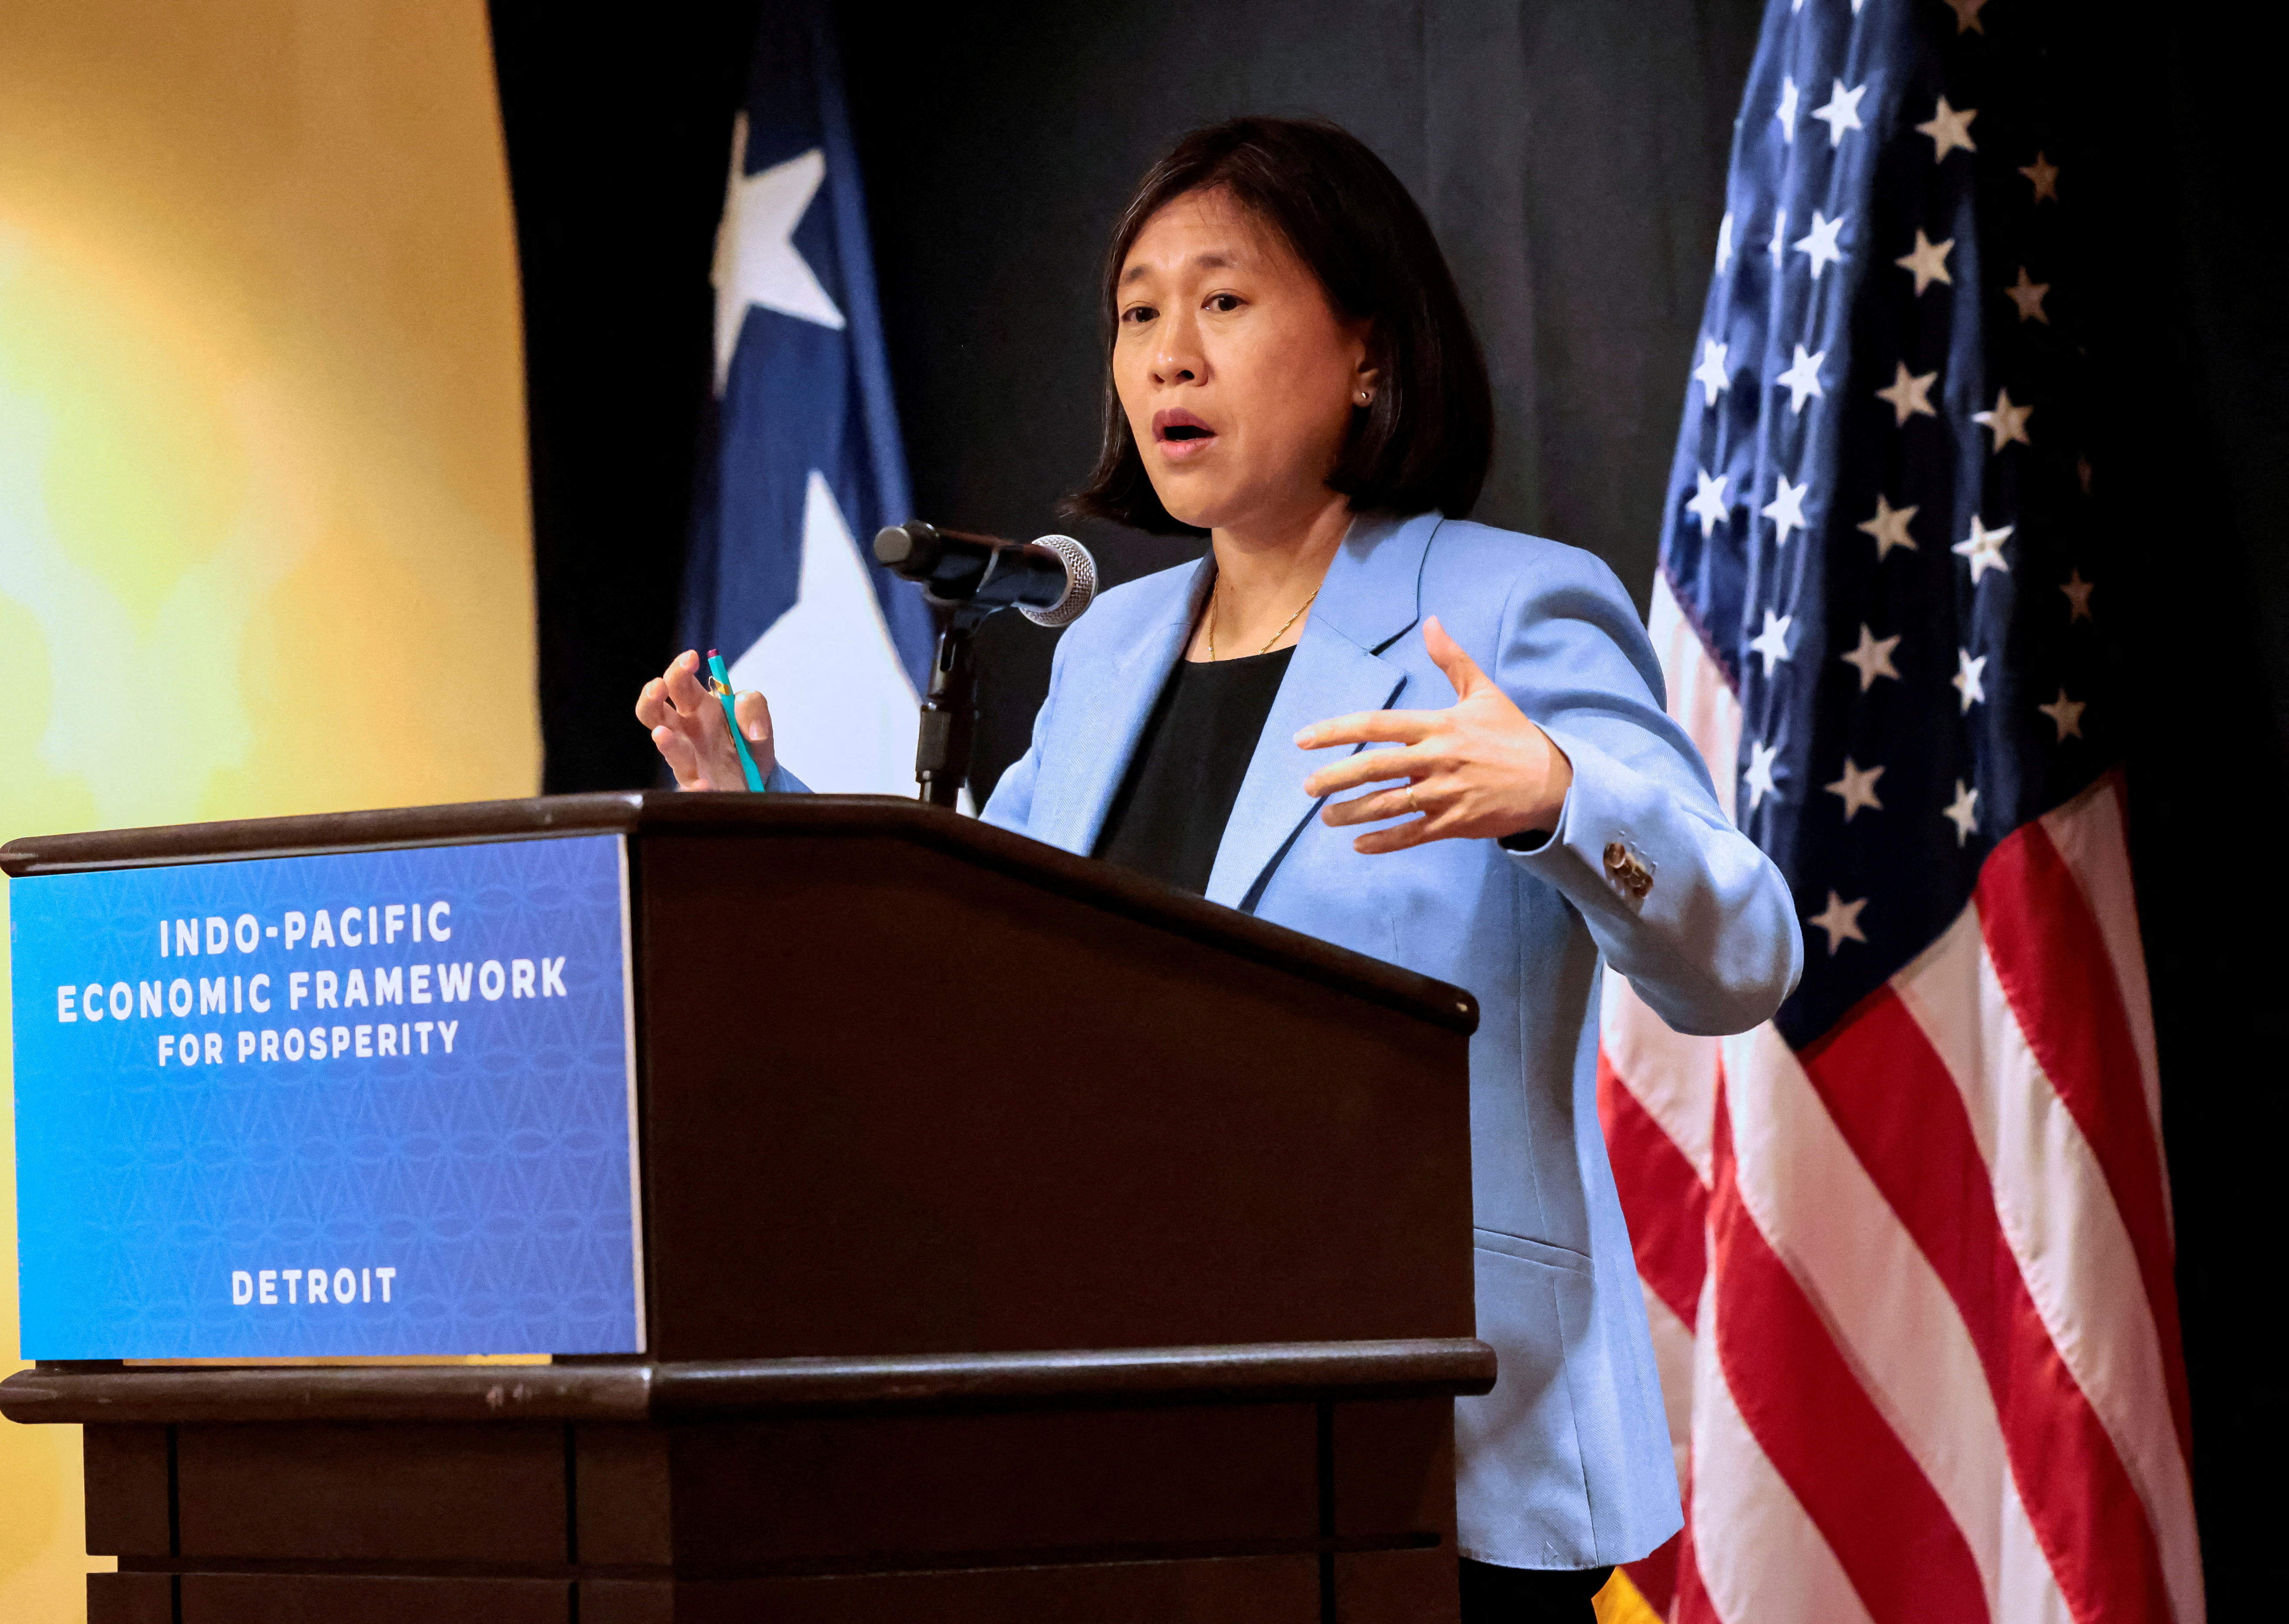 U.S. Trade Representative Katherine Tai addresses the media during a meeting in Detroit